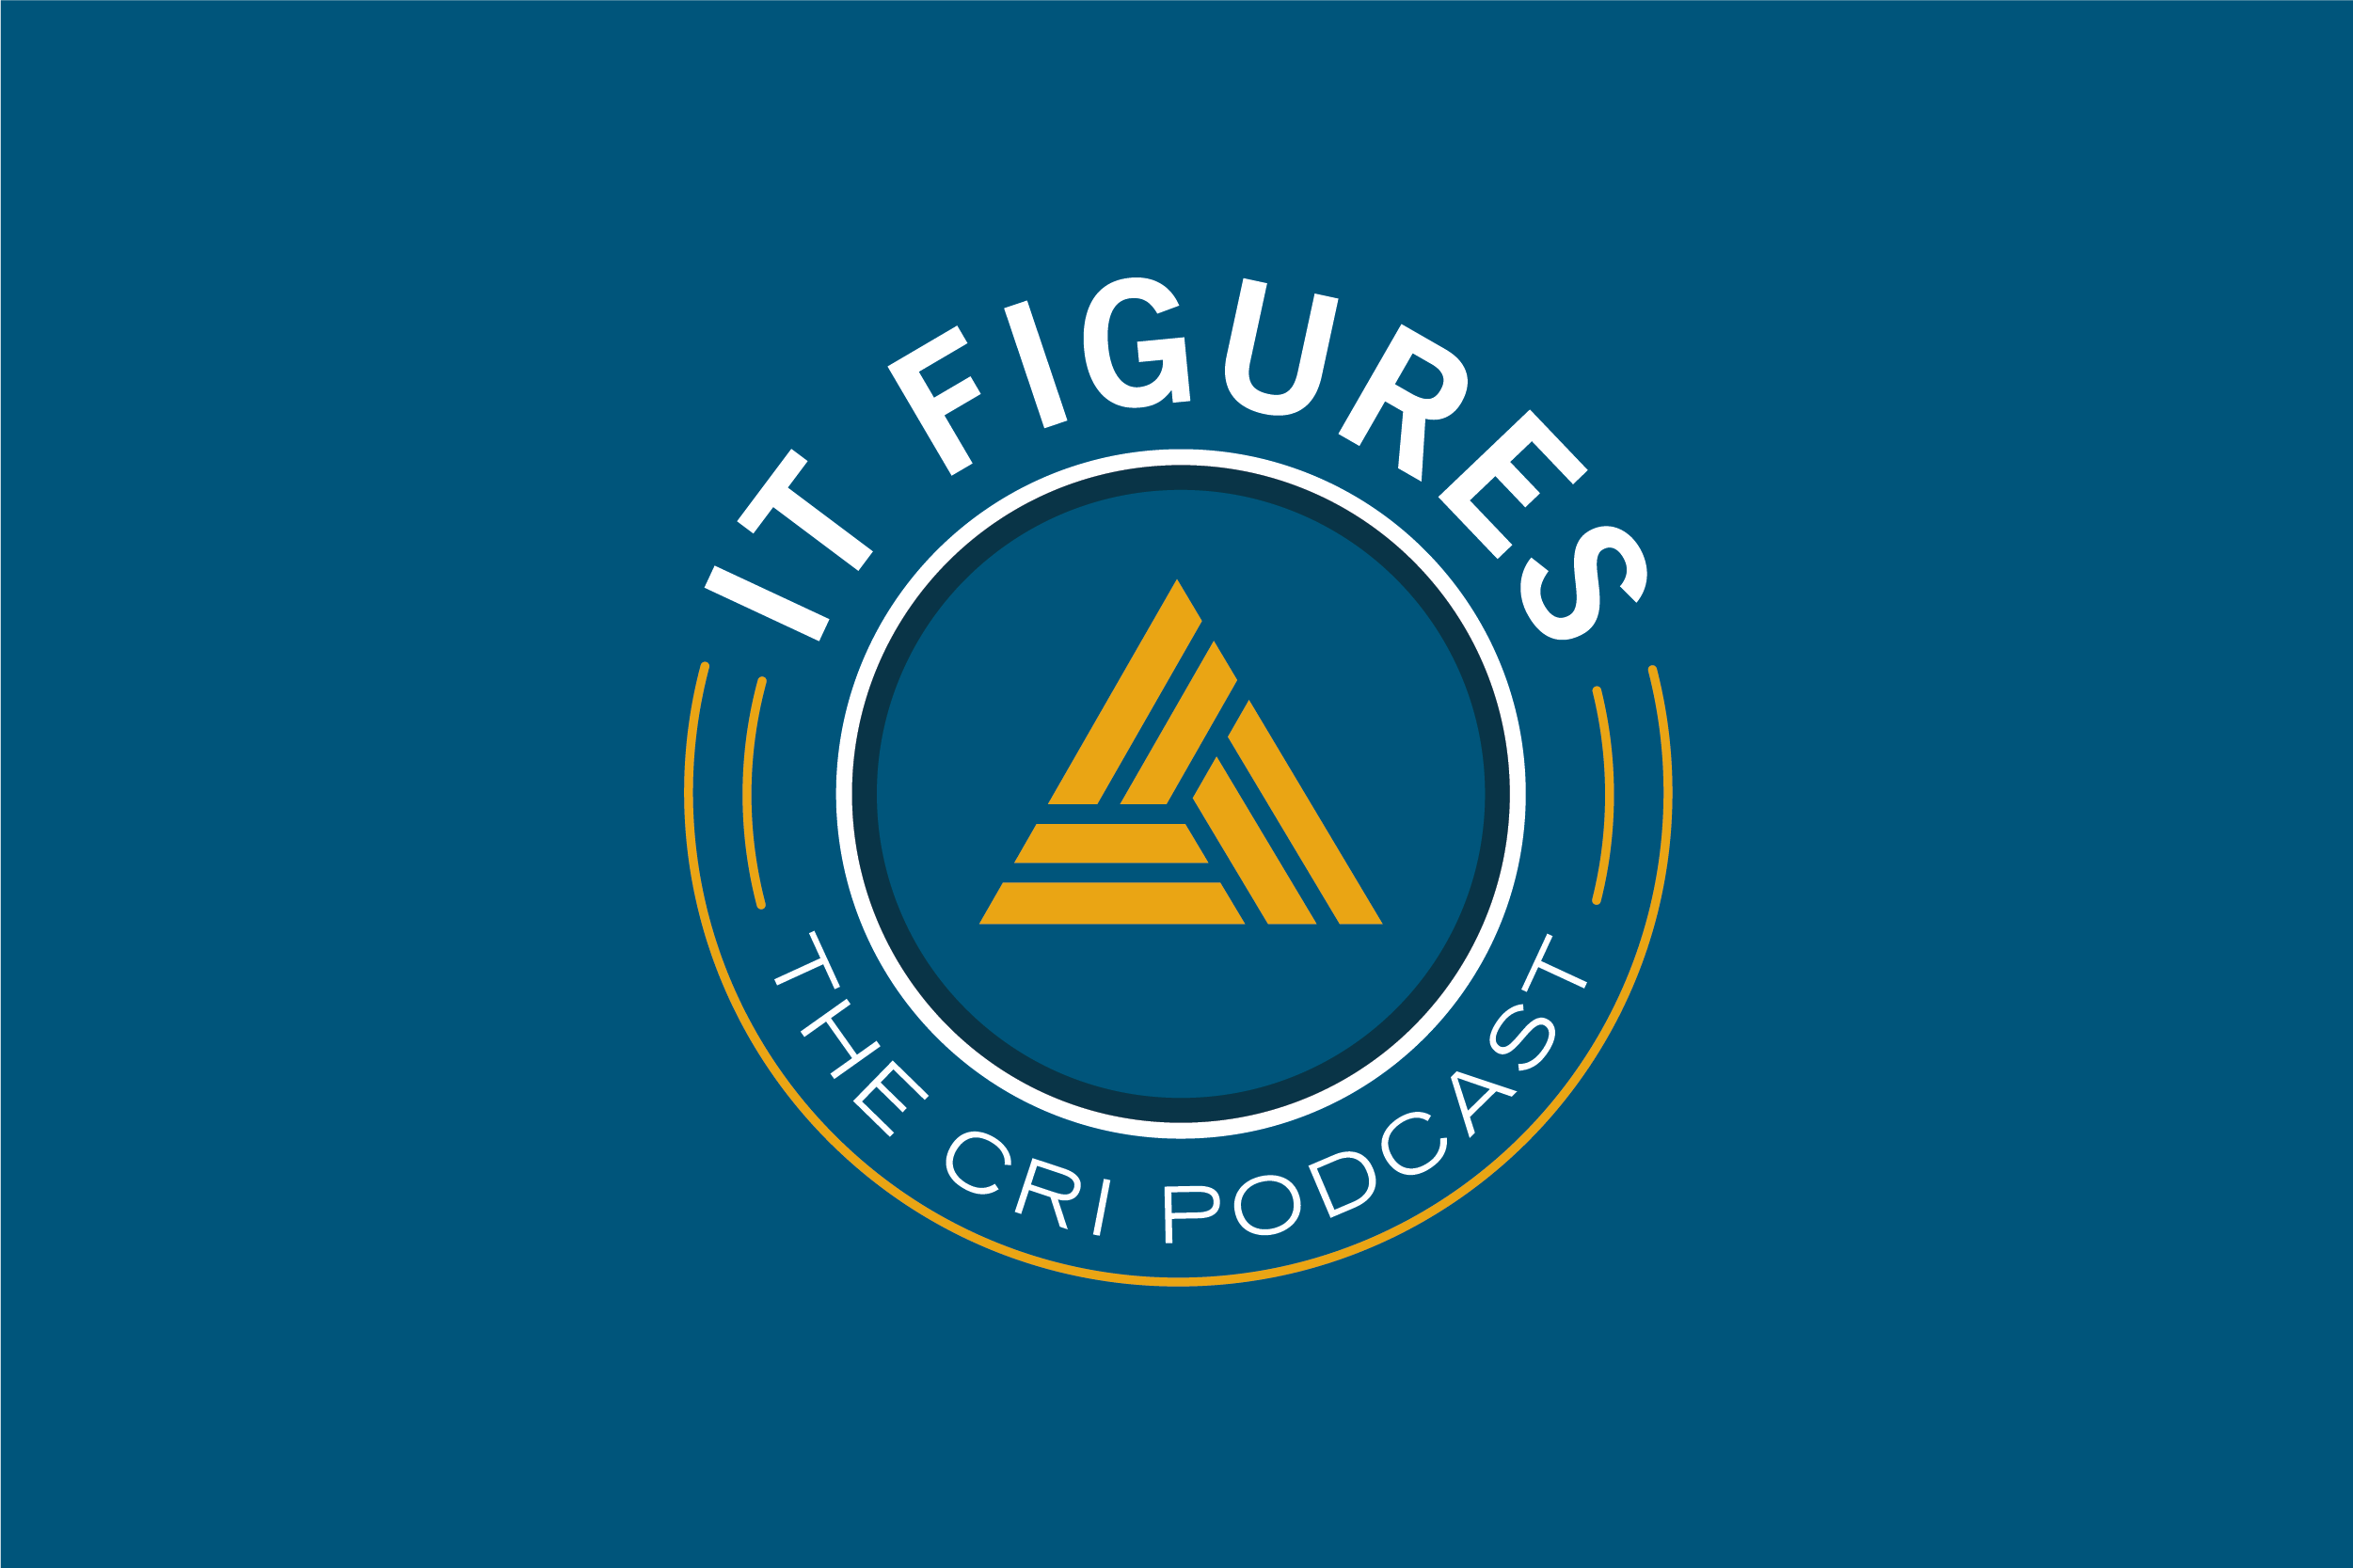 It Figures: The CRI Podcast